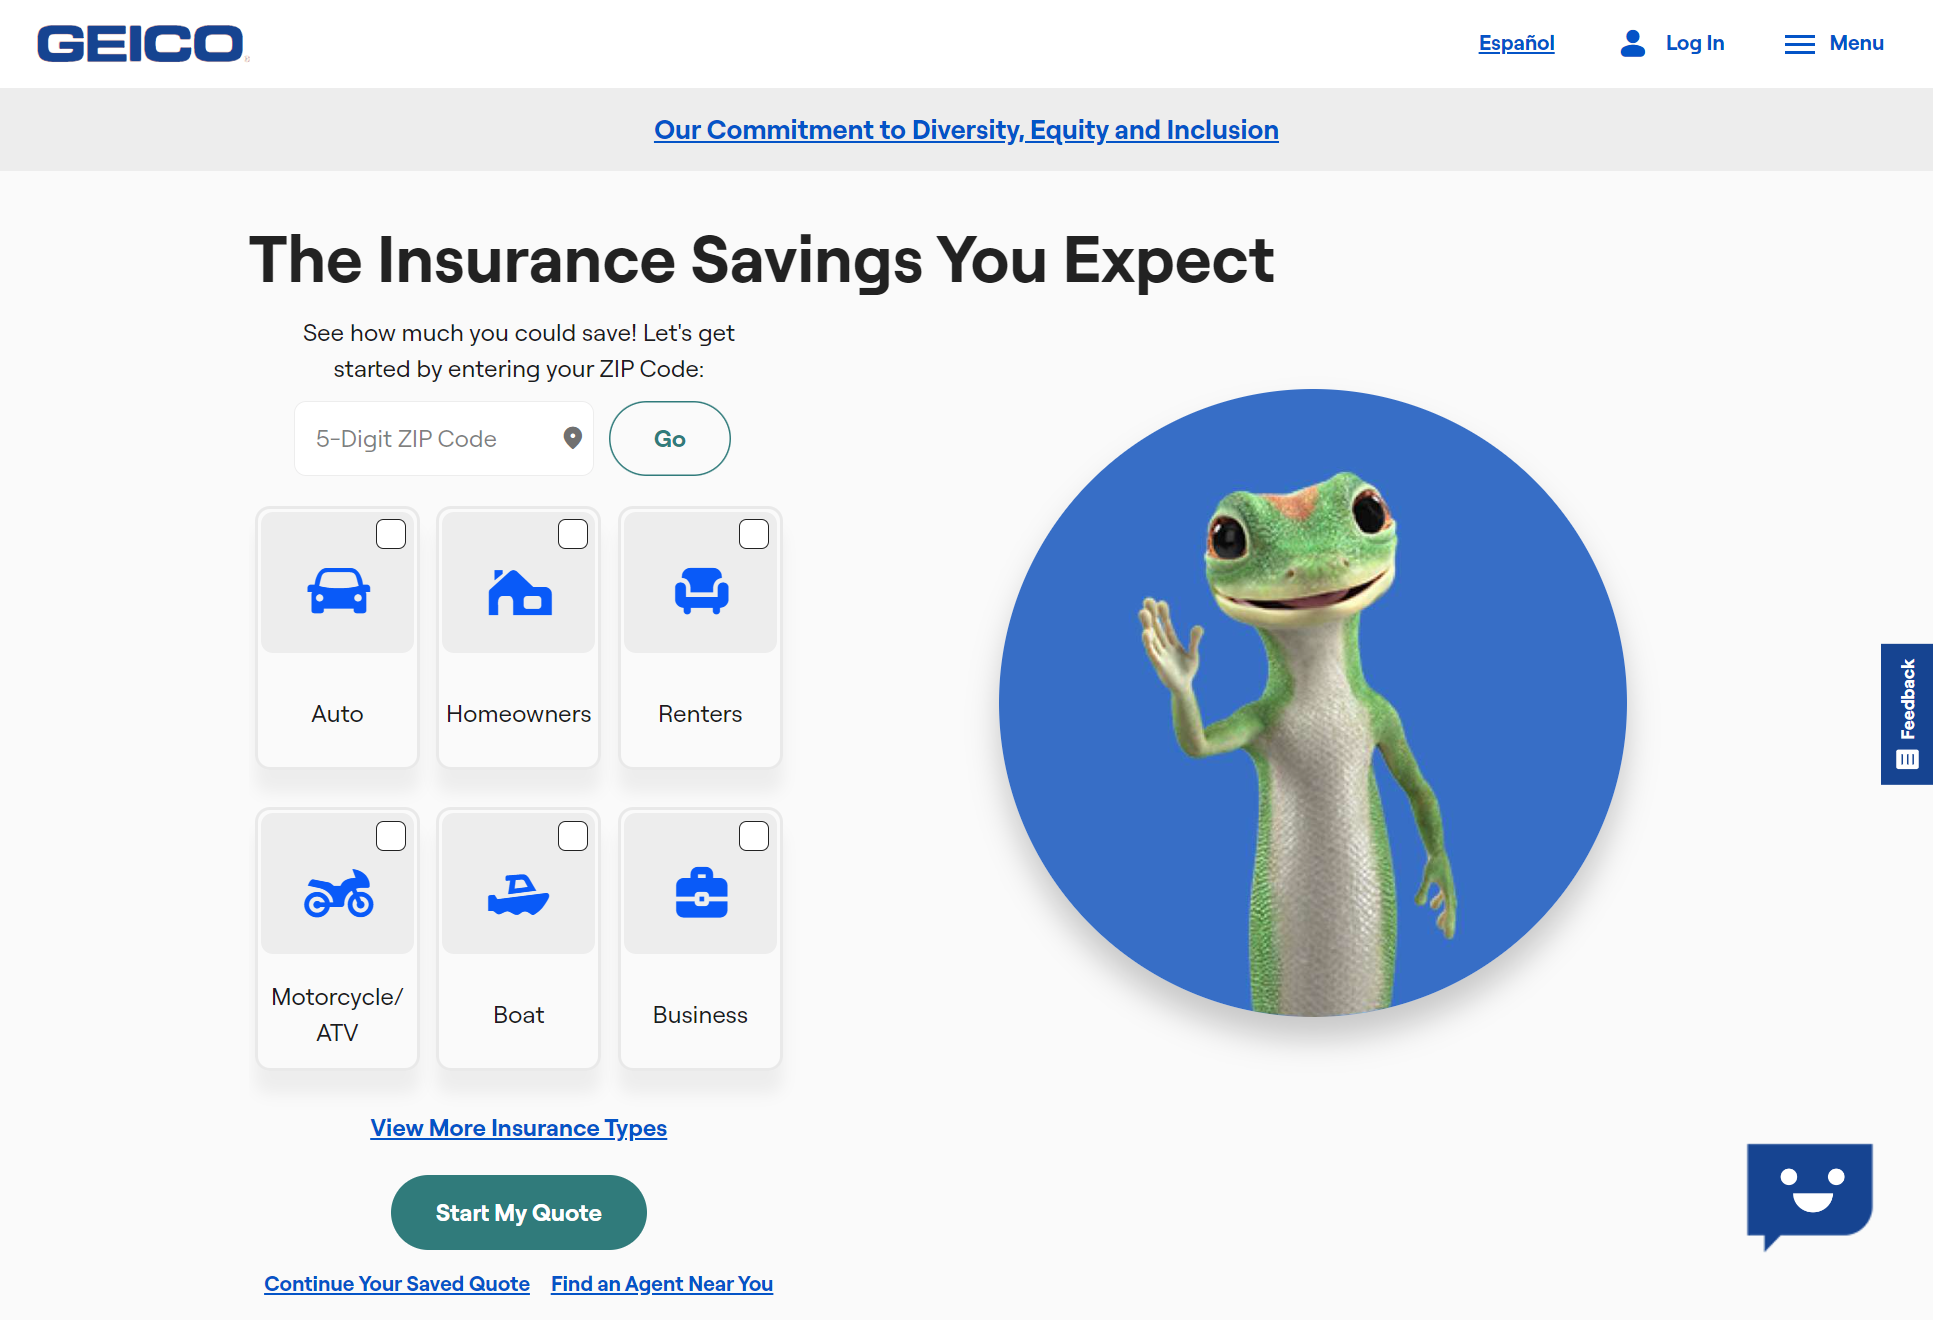 Best Auto Insurance Companies That Don't Require Prior Insurance: Geico